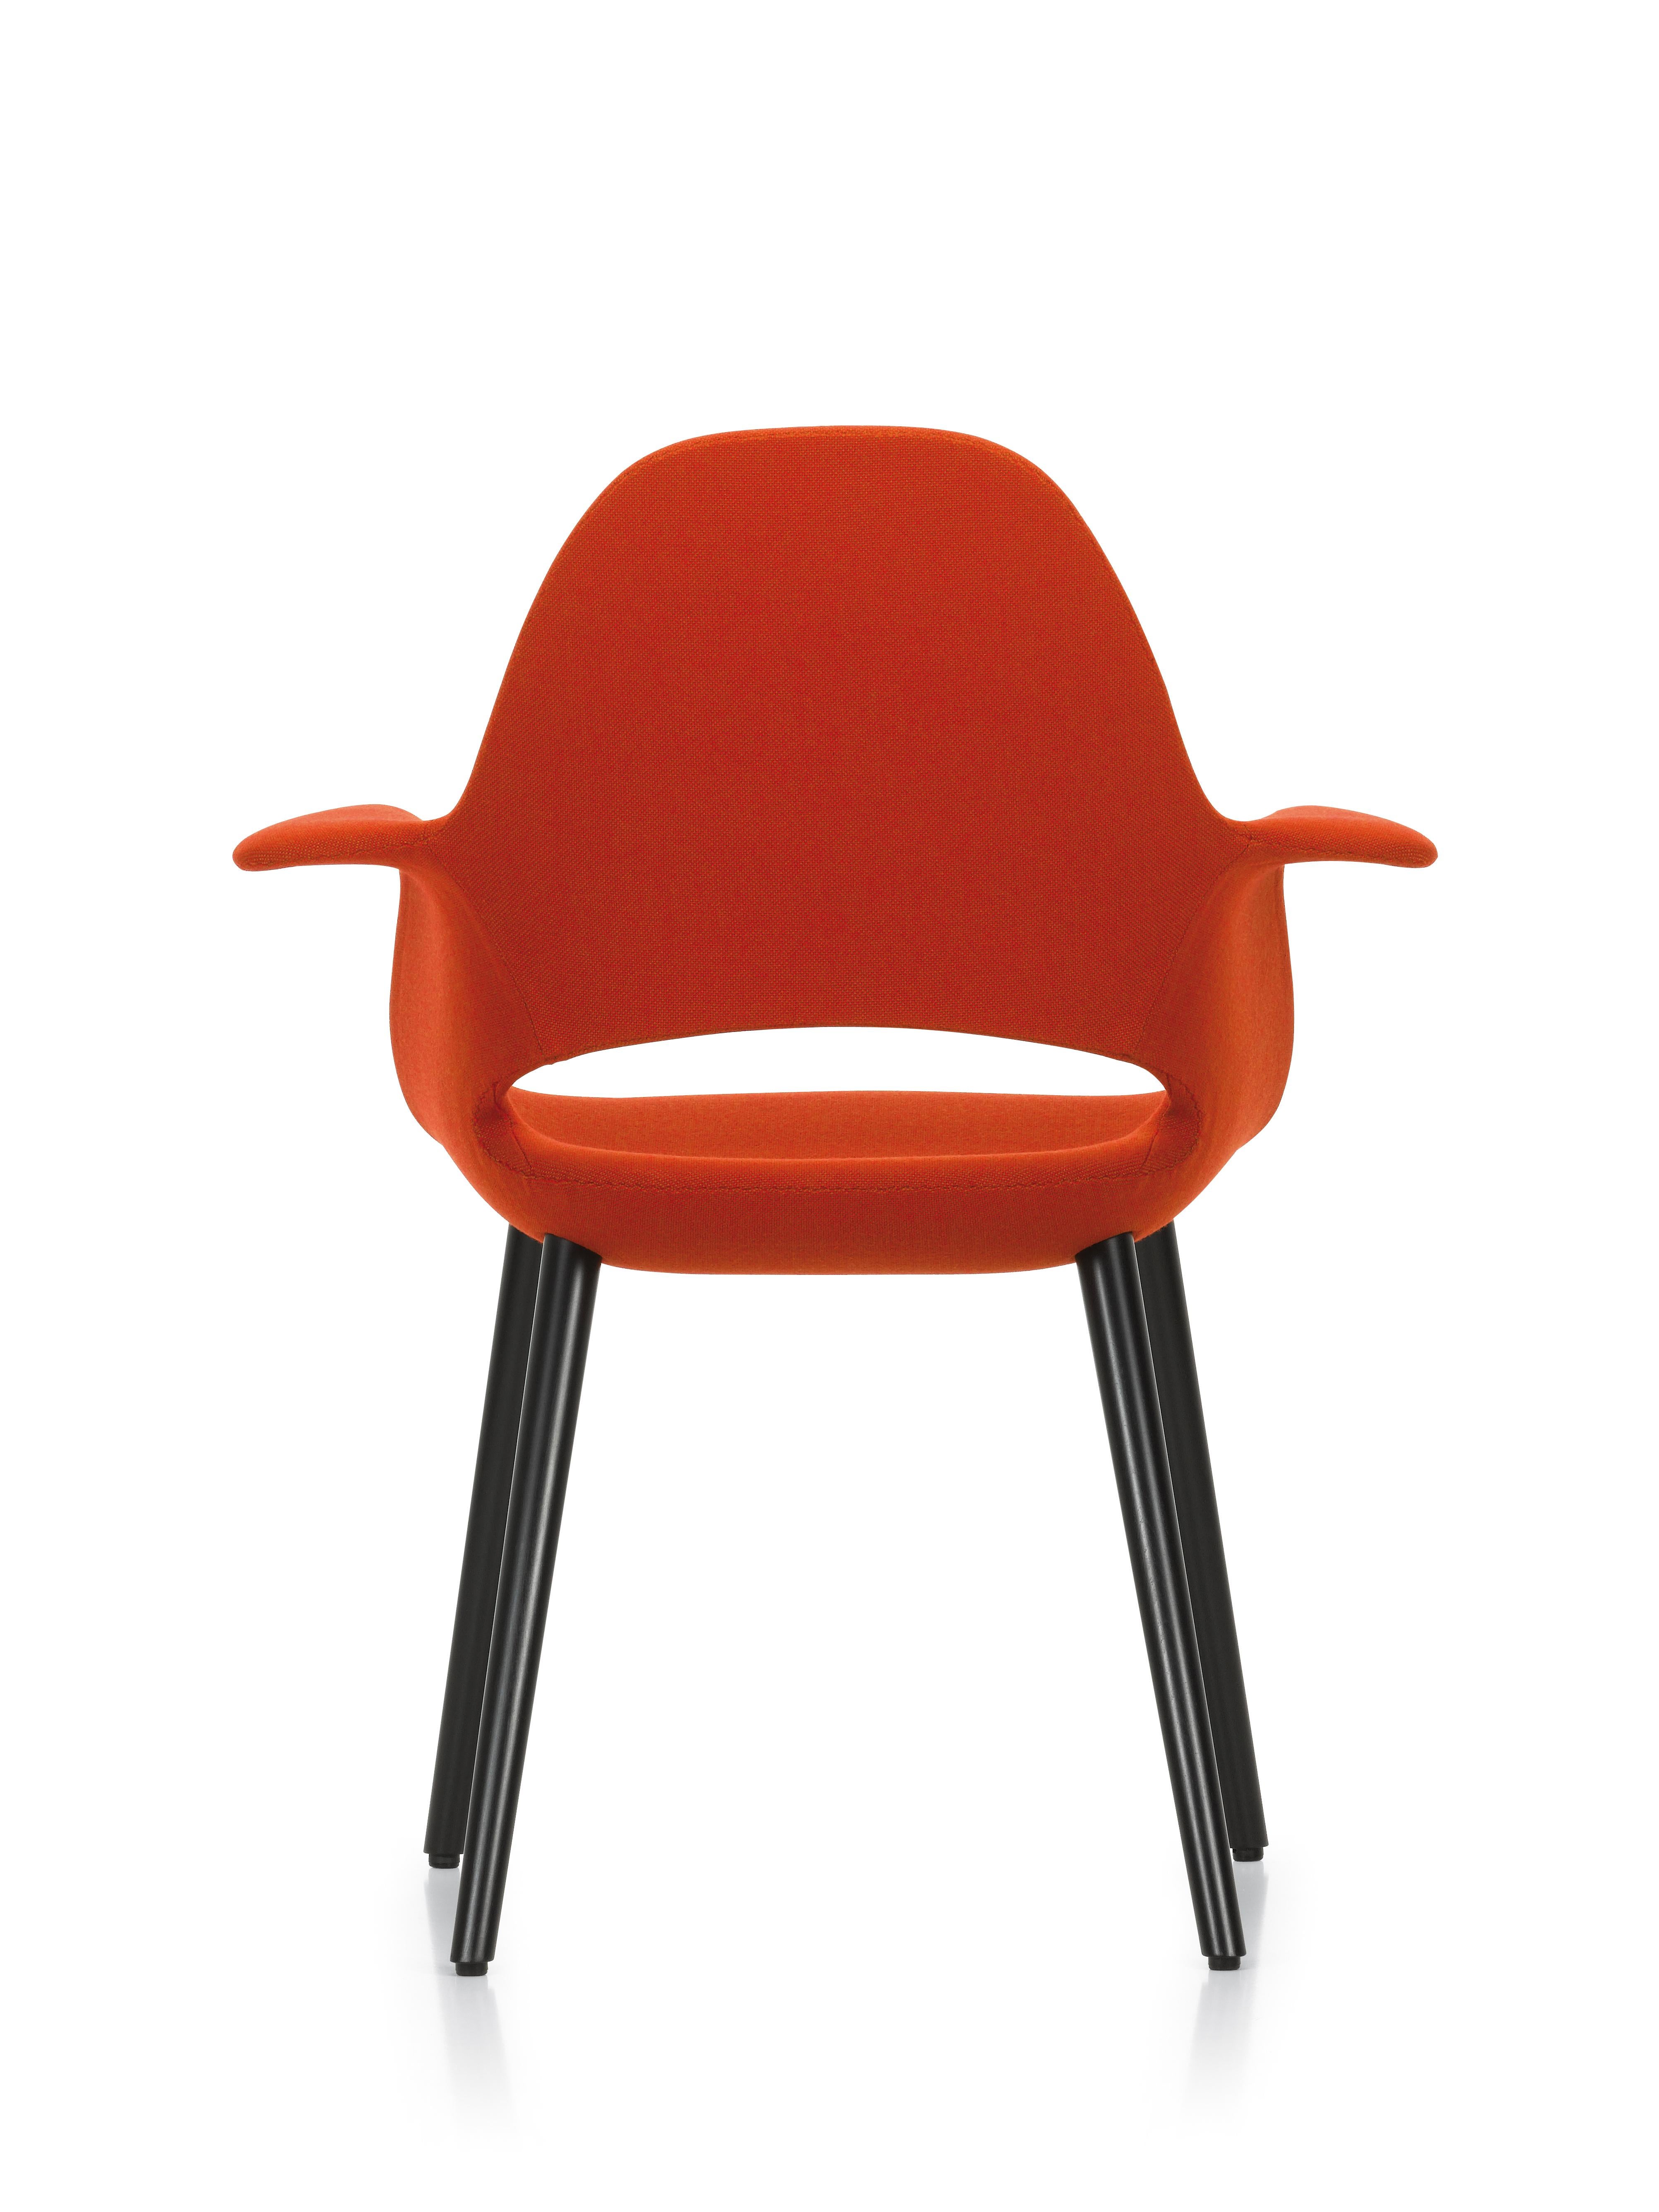 Swiss Vitra Organic Conference Chair in Red & Poppy by Charles Eames & Eero Saarinen For Sale